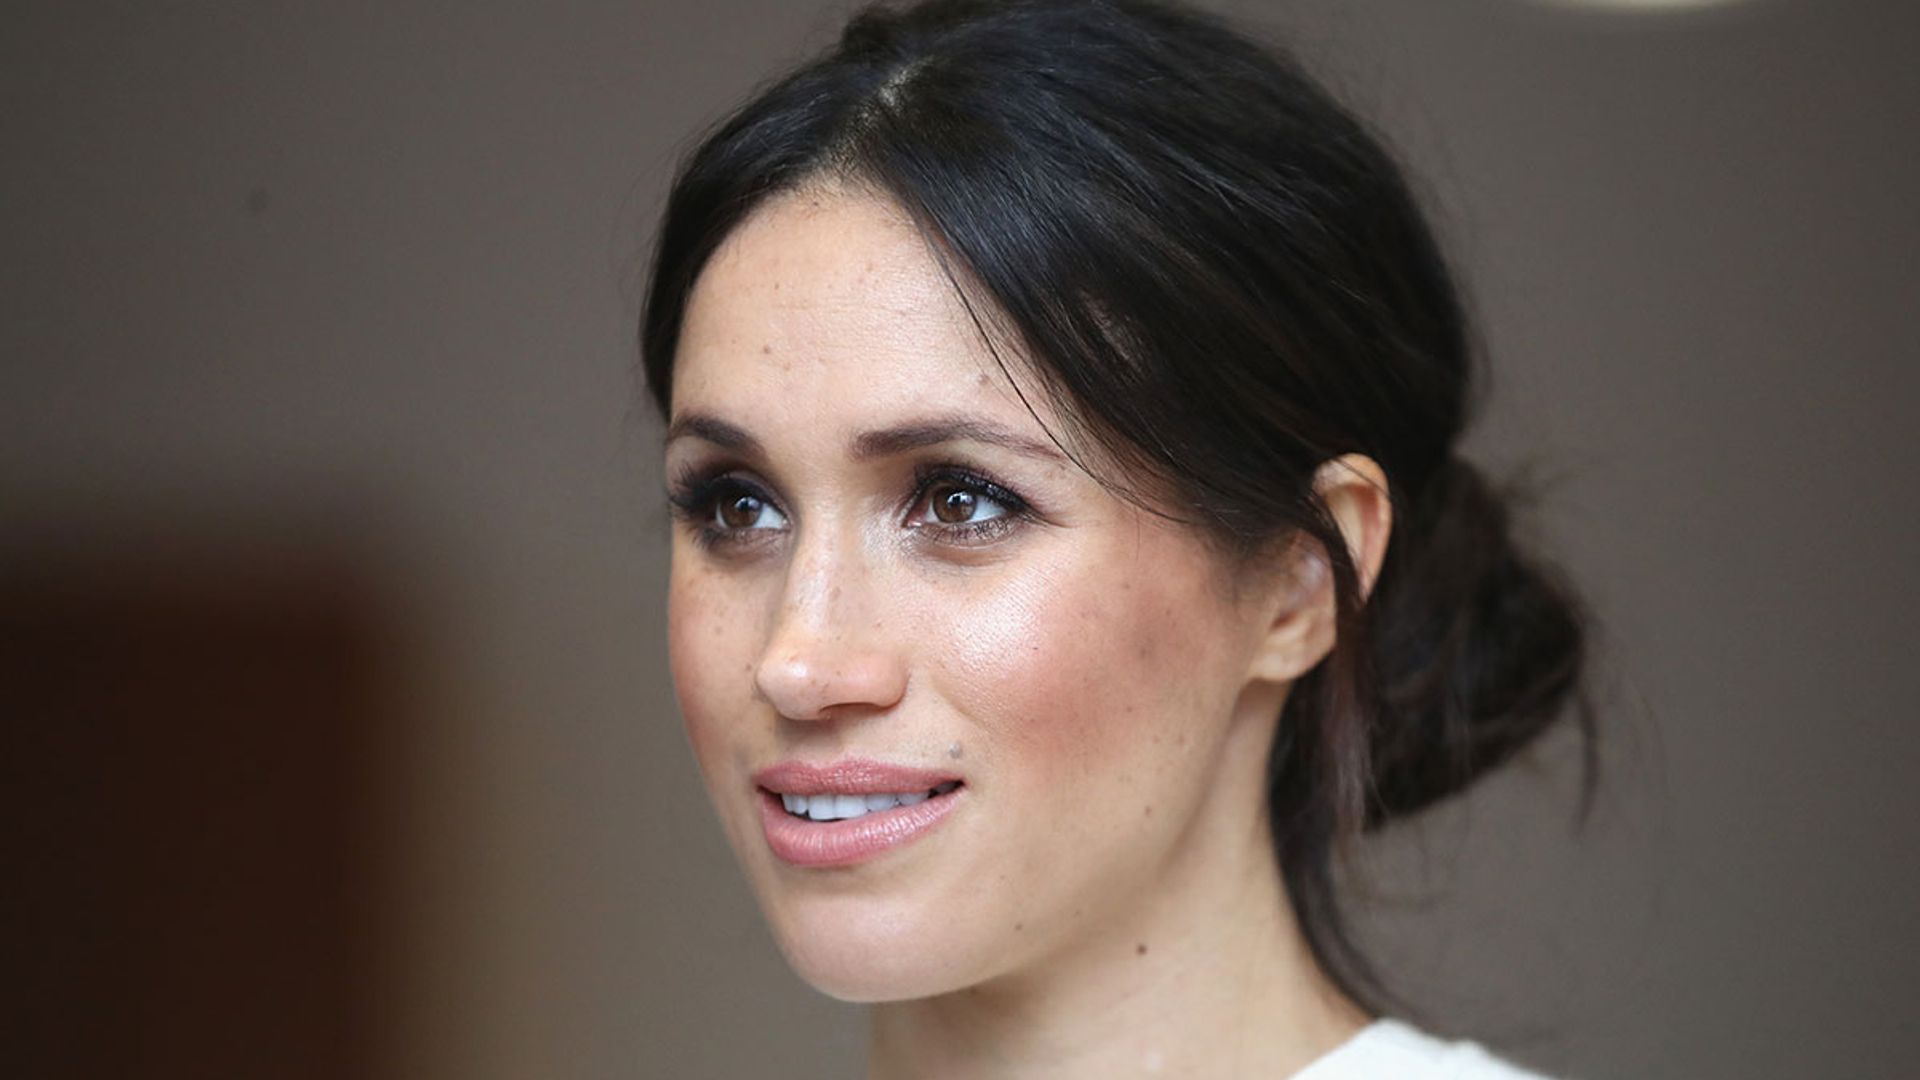 Meghan Markle Accused for Wearing Diamonds During a Photoshoot for Time Magazine